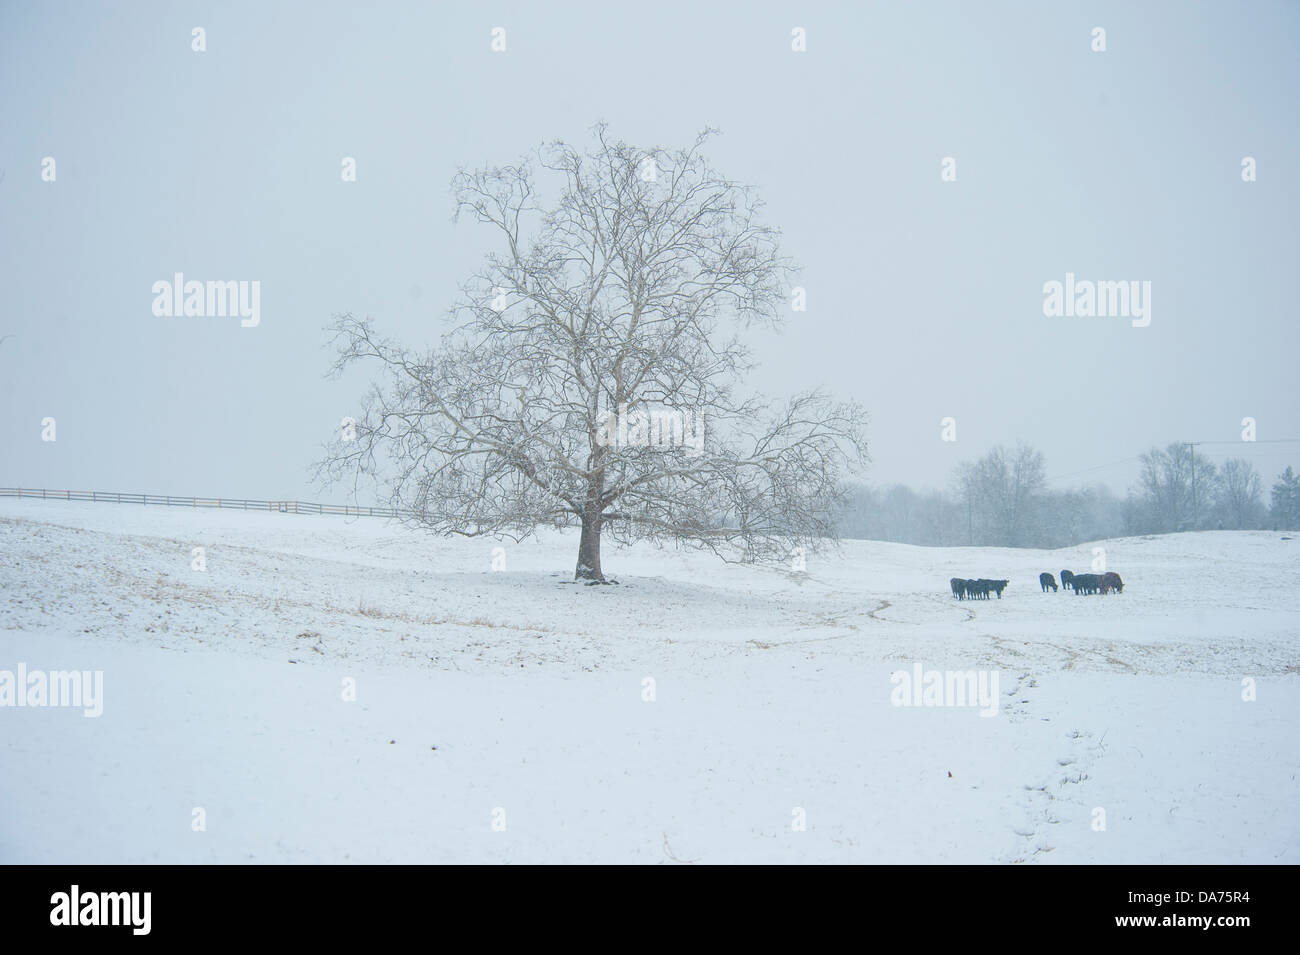 Cattle huddled in snowy pasture Stock Photo